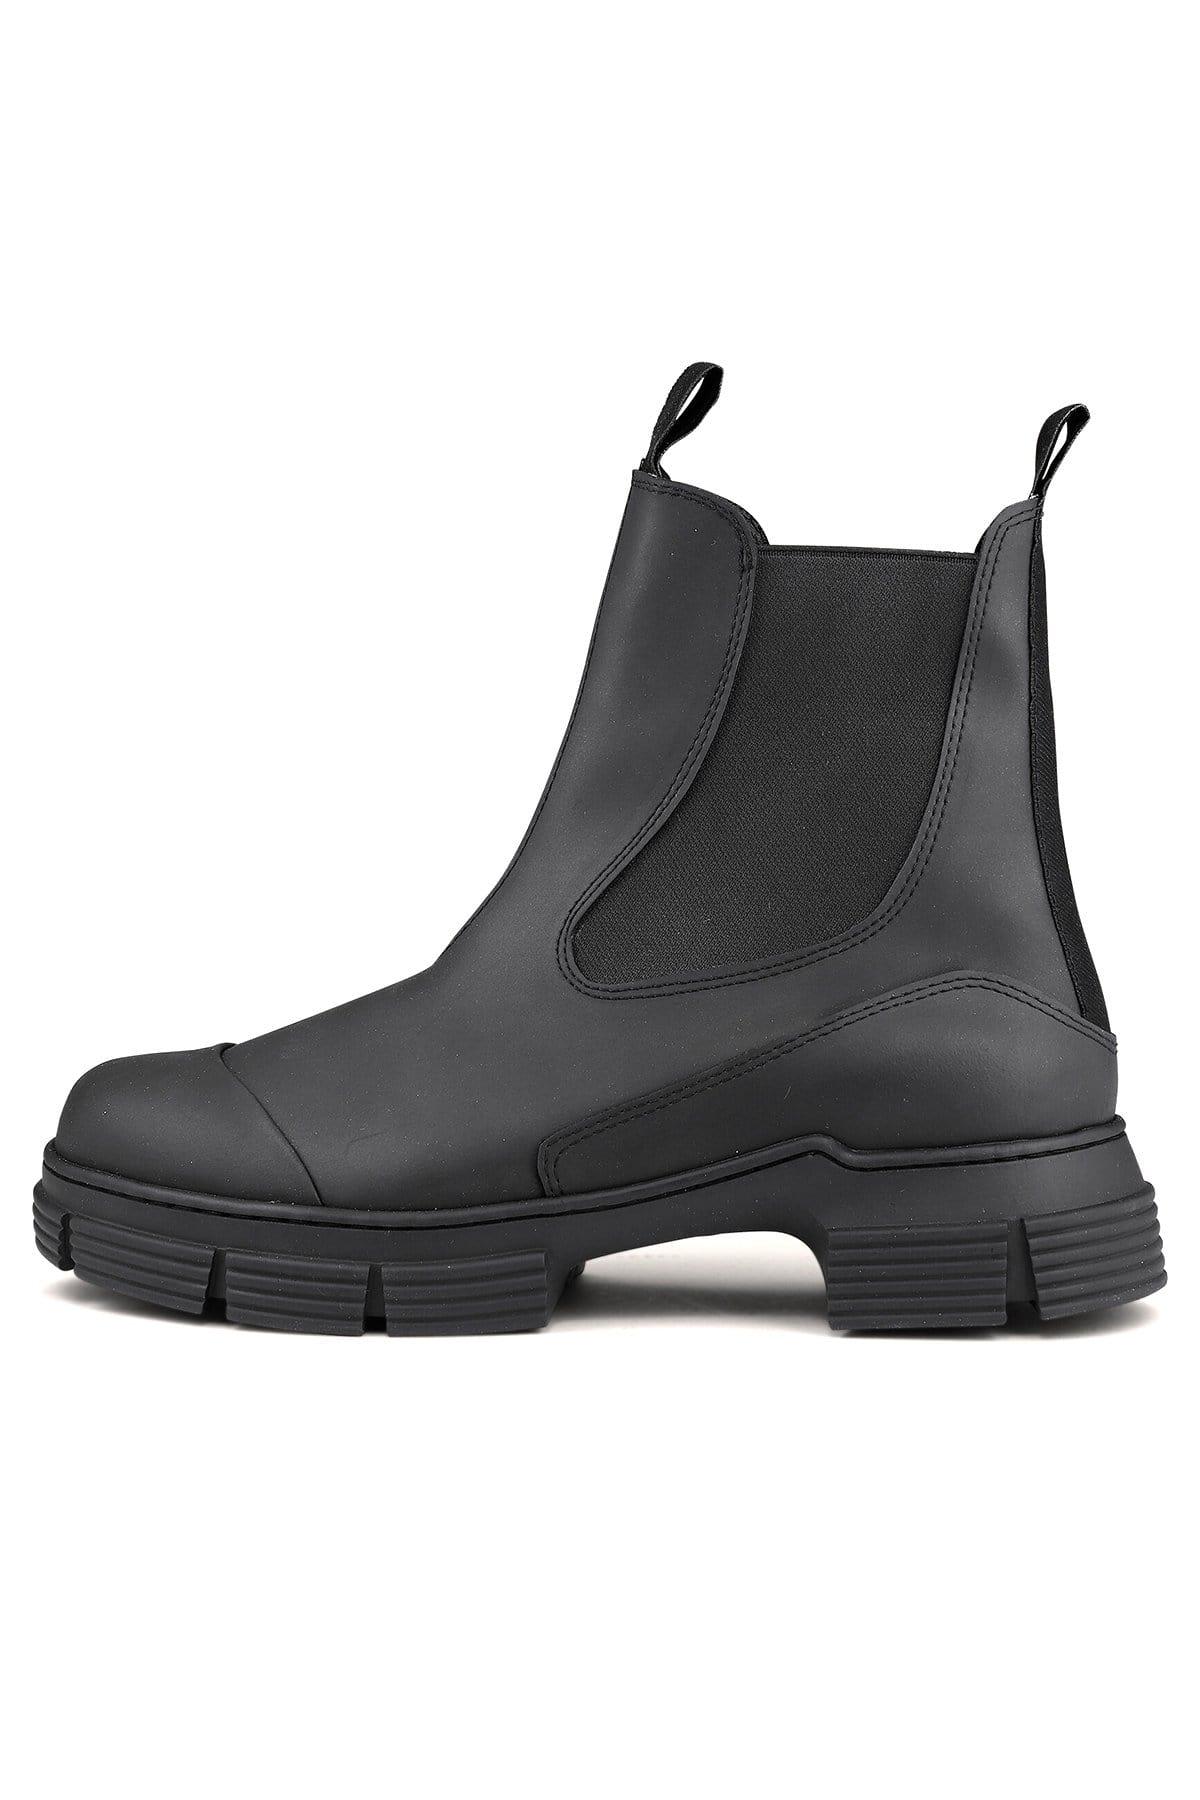 Ganni Recycled Rubber Boot in Black | Lyst